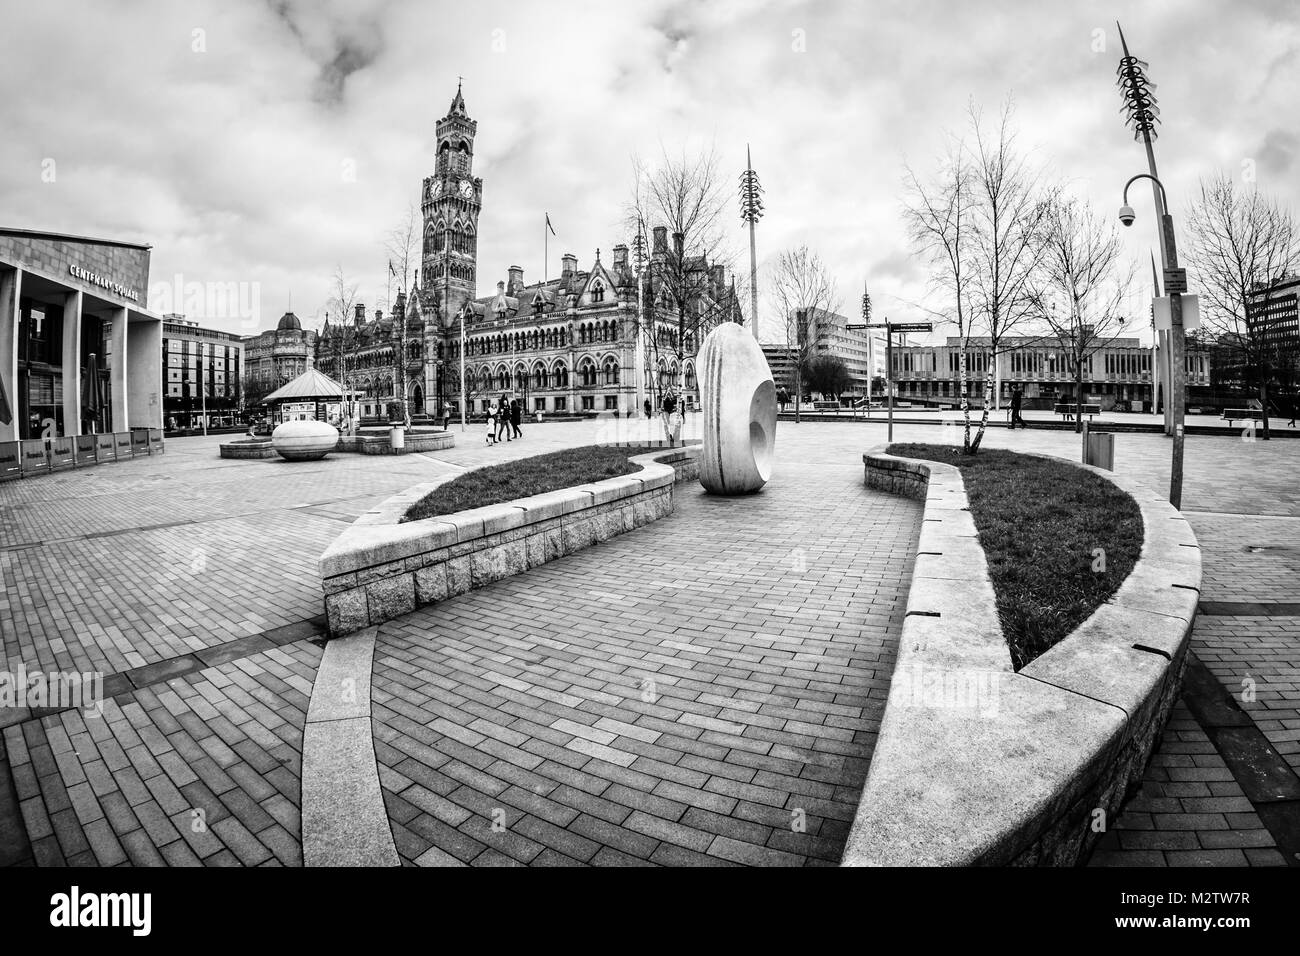 Bradford council Black and White Stock Photos & Images - Alamy